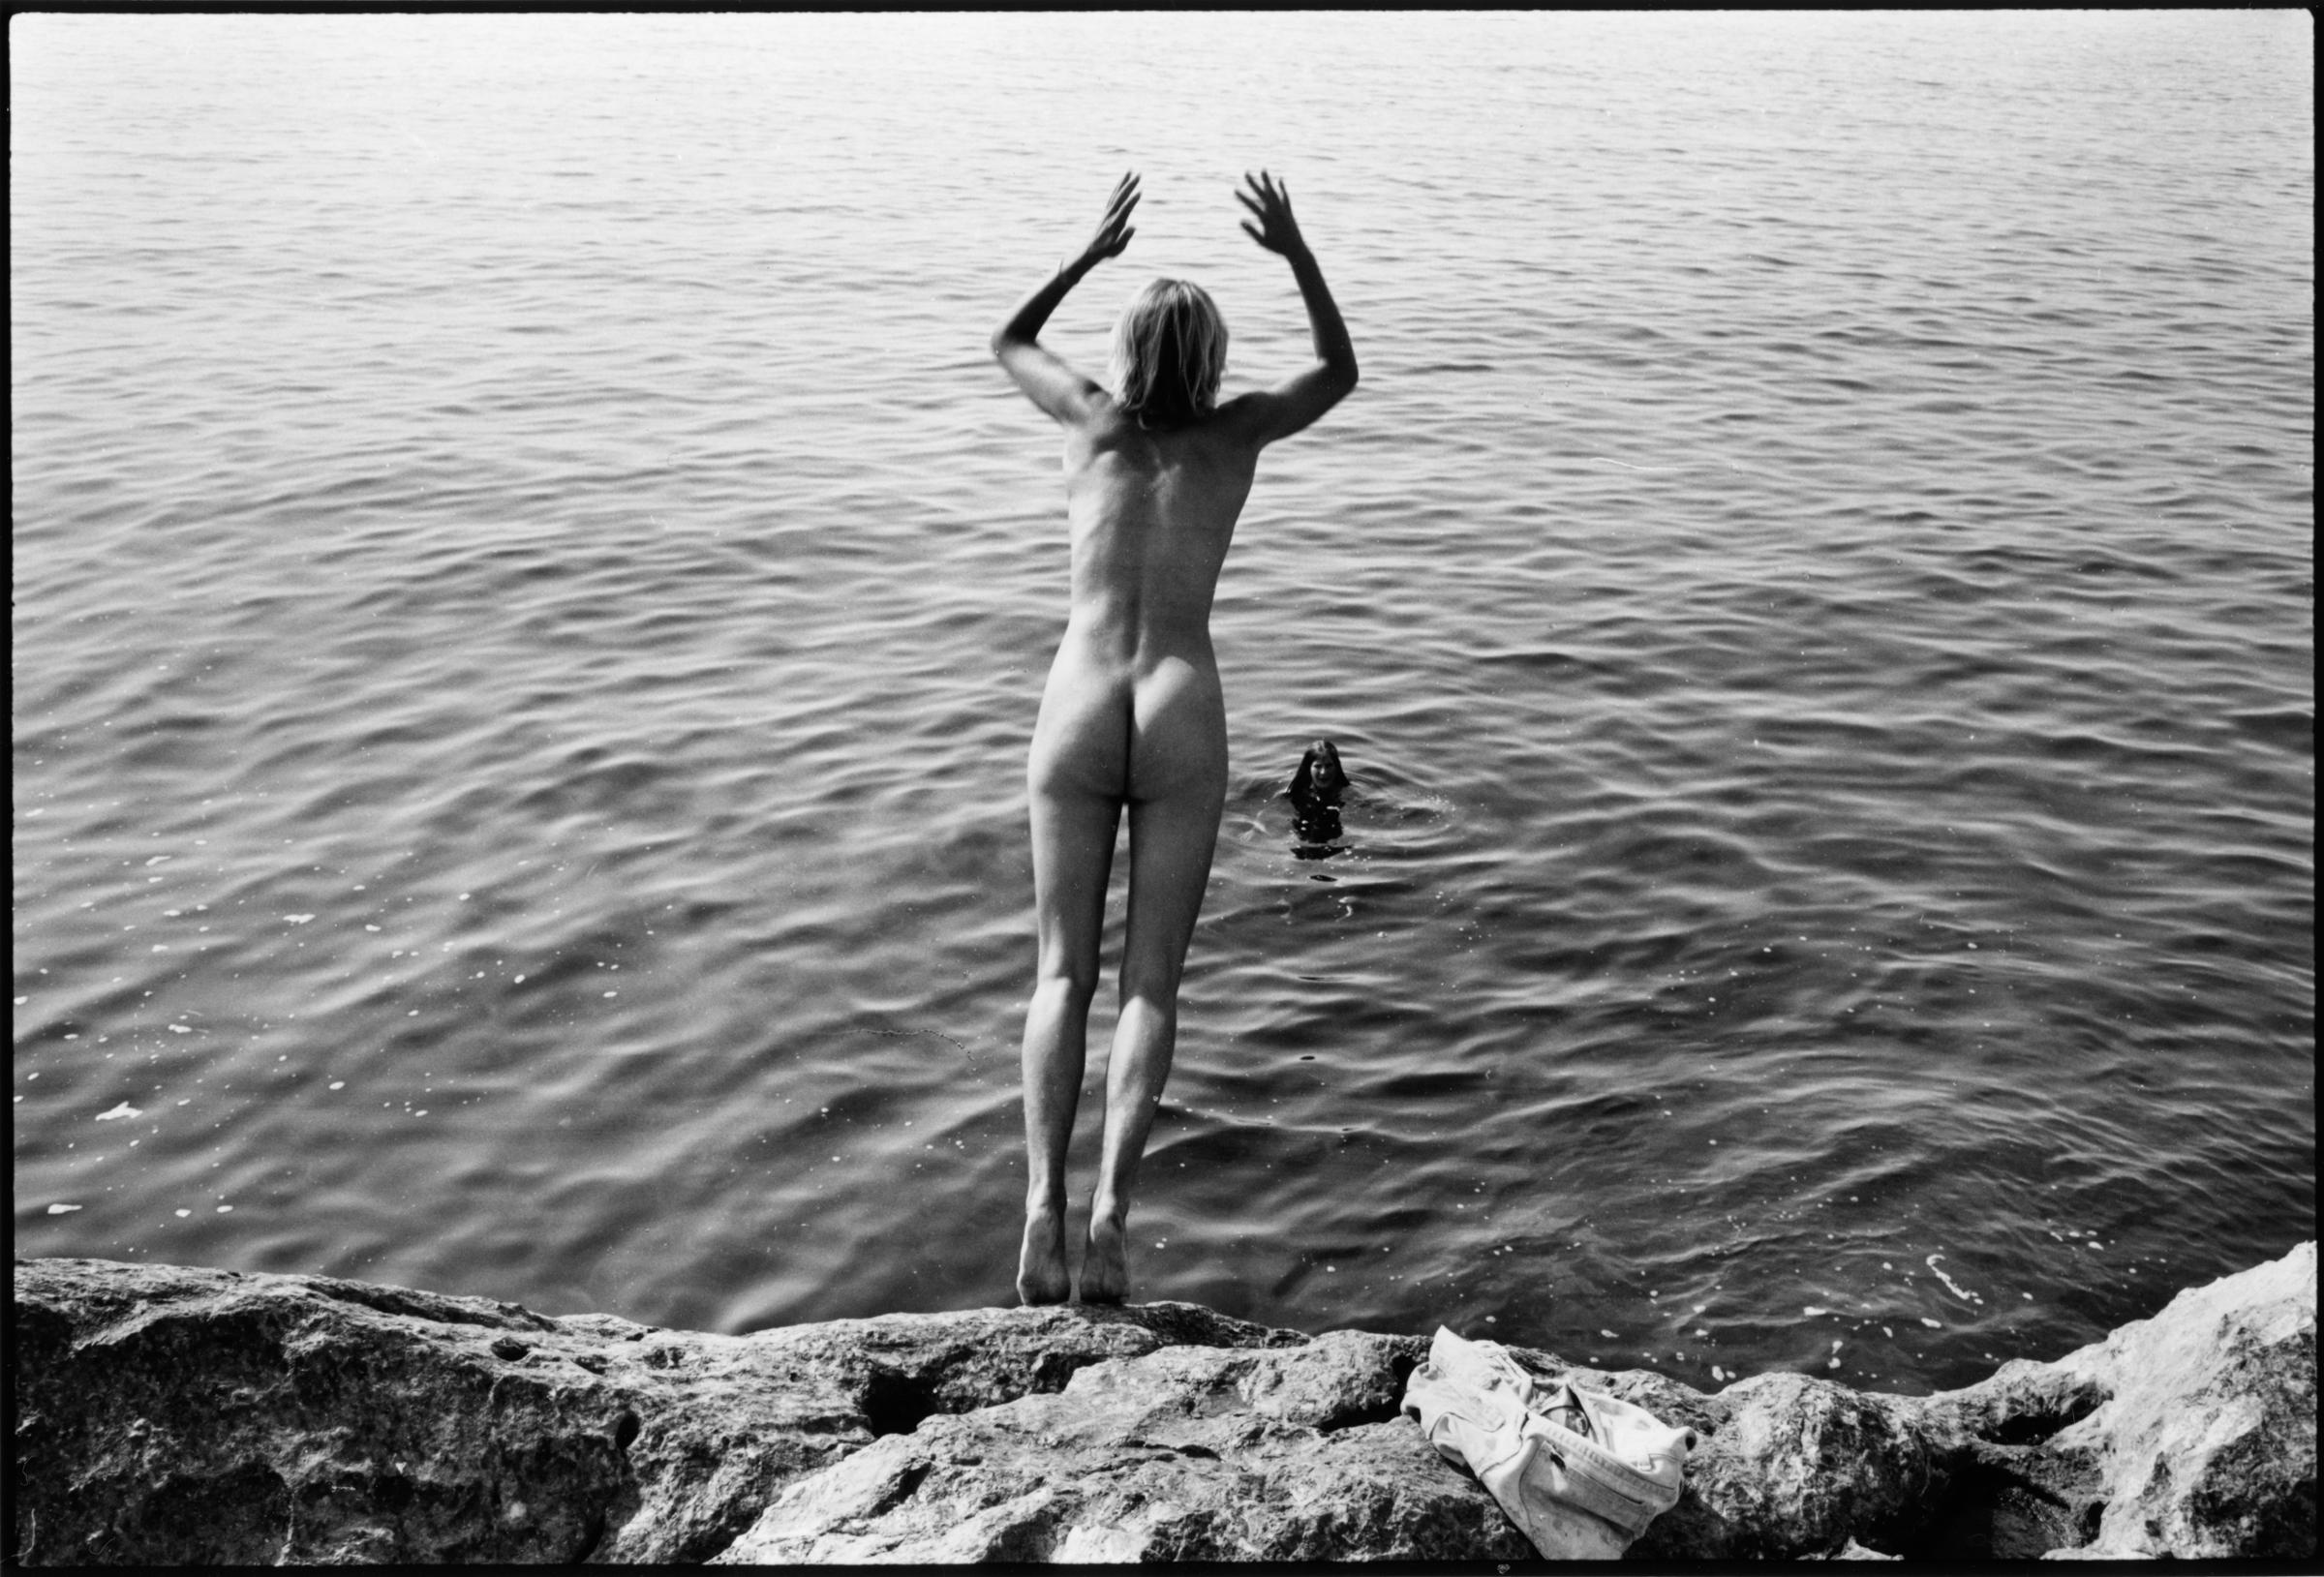 Lisa McCord Black and White Photograph – Zwei Swimmers, 1977